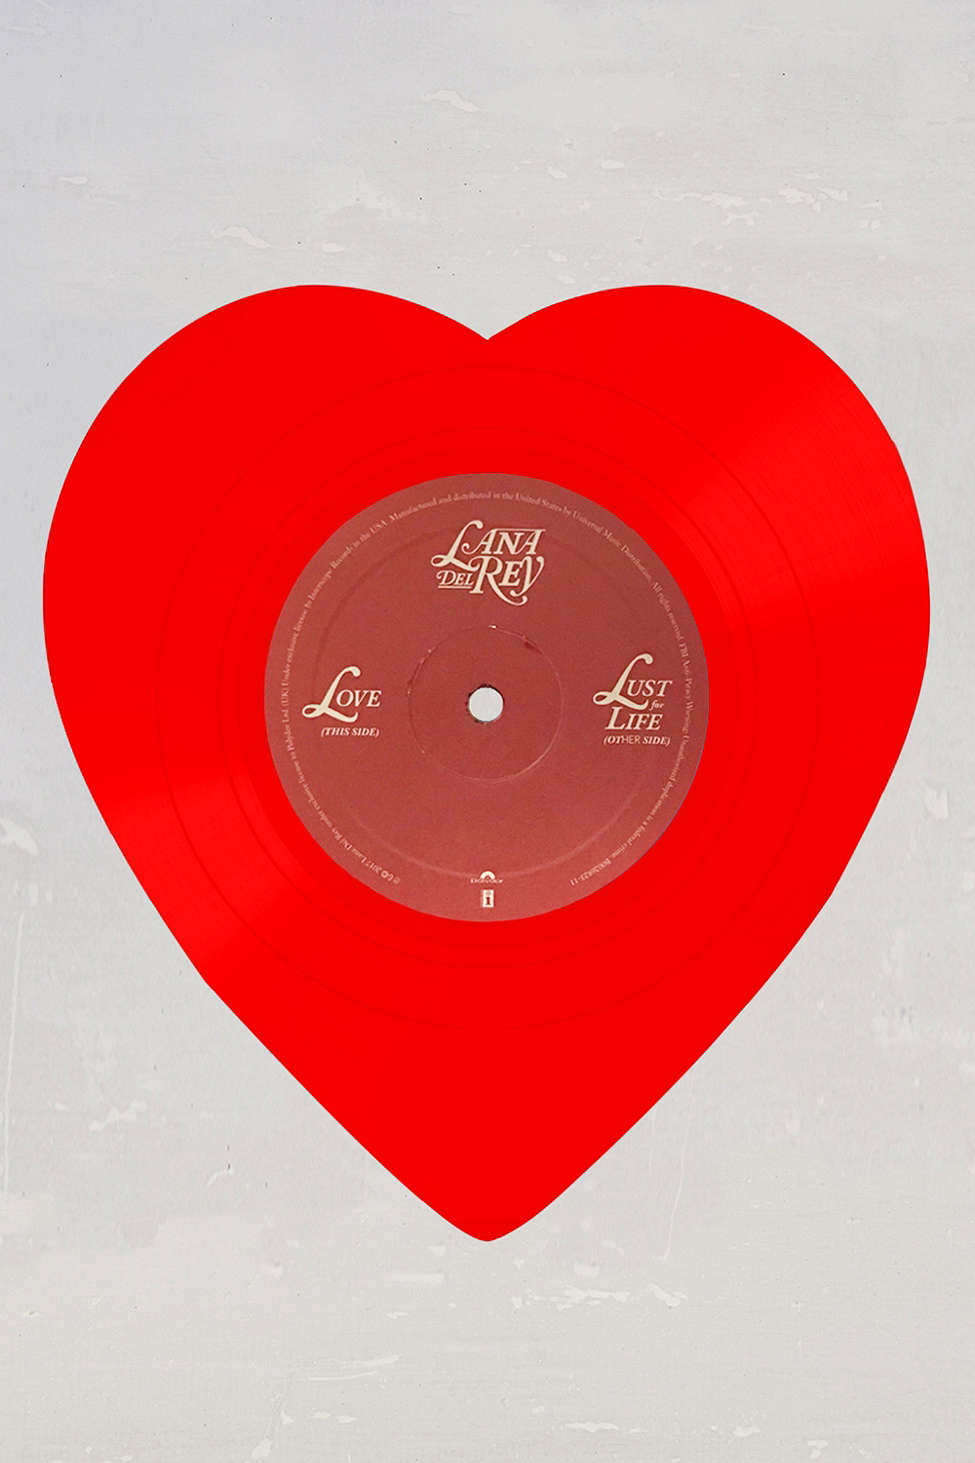 Urban Outfitters on X: ❤️ @lanadelrey's singles Love and Lust for Life are  now on heart-shaped vinyl (!!!) only at UO:    / X